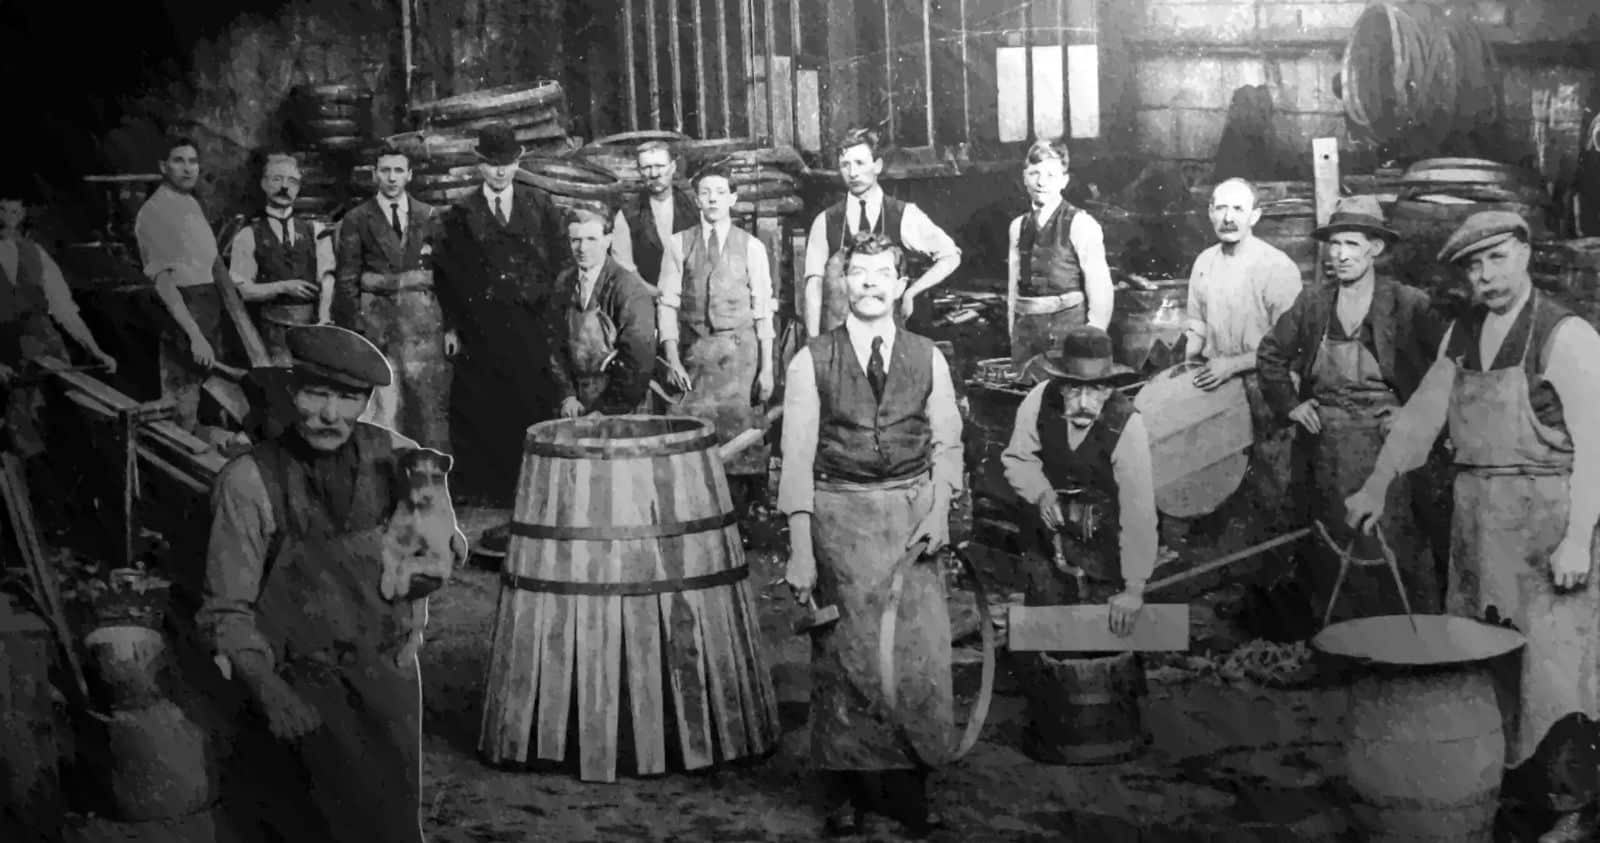 Vintage photo of a craft distilling group